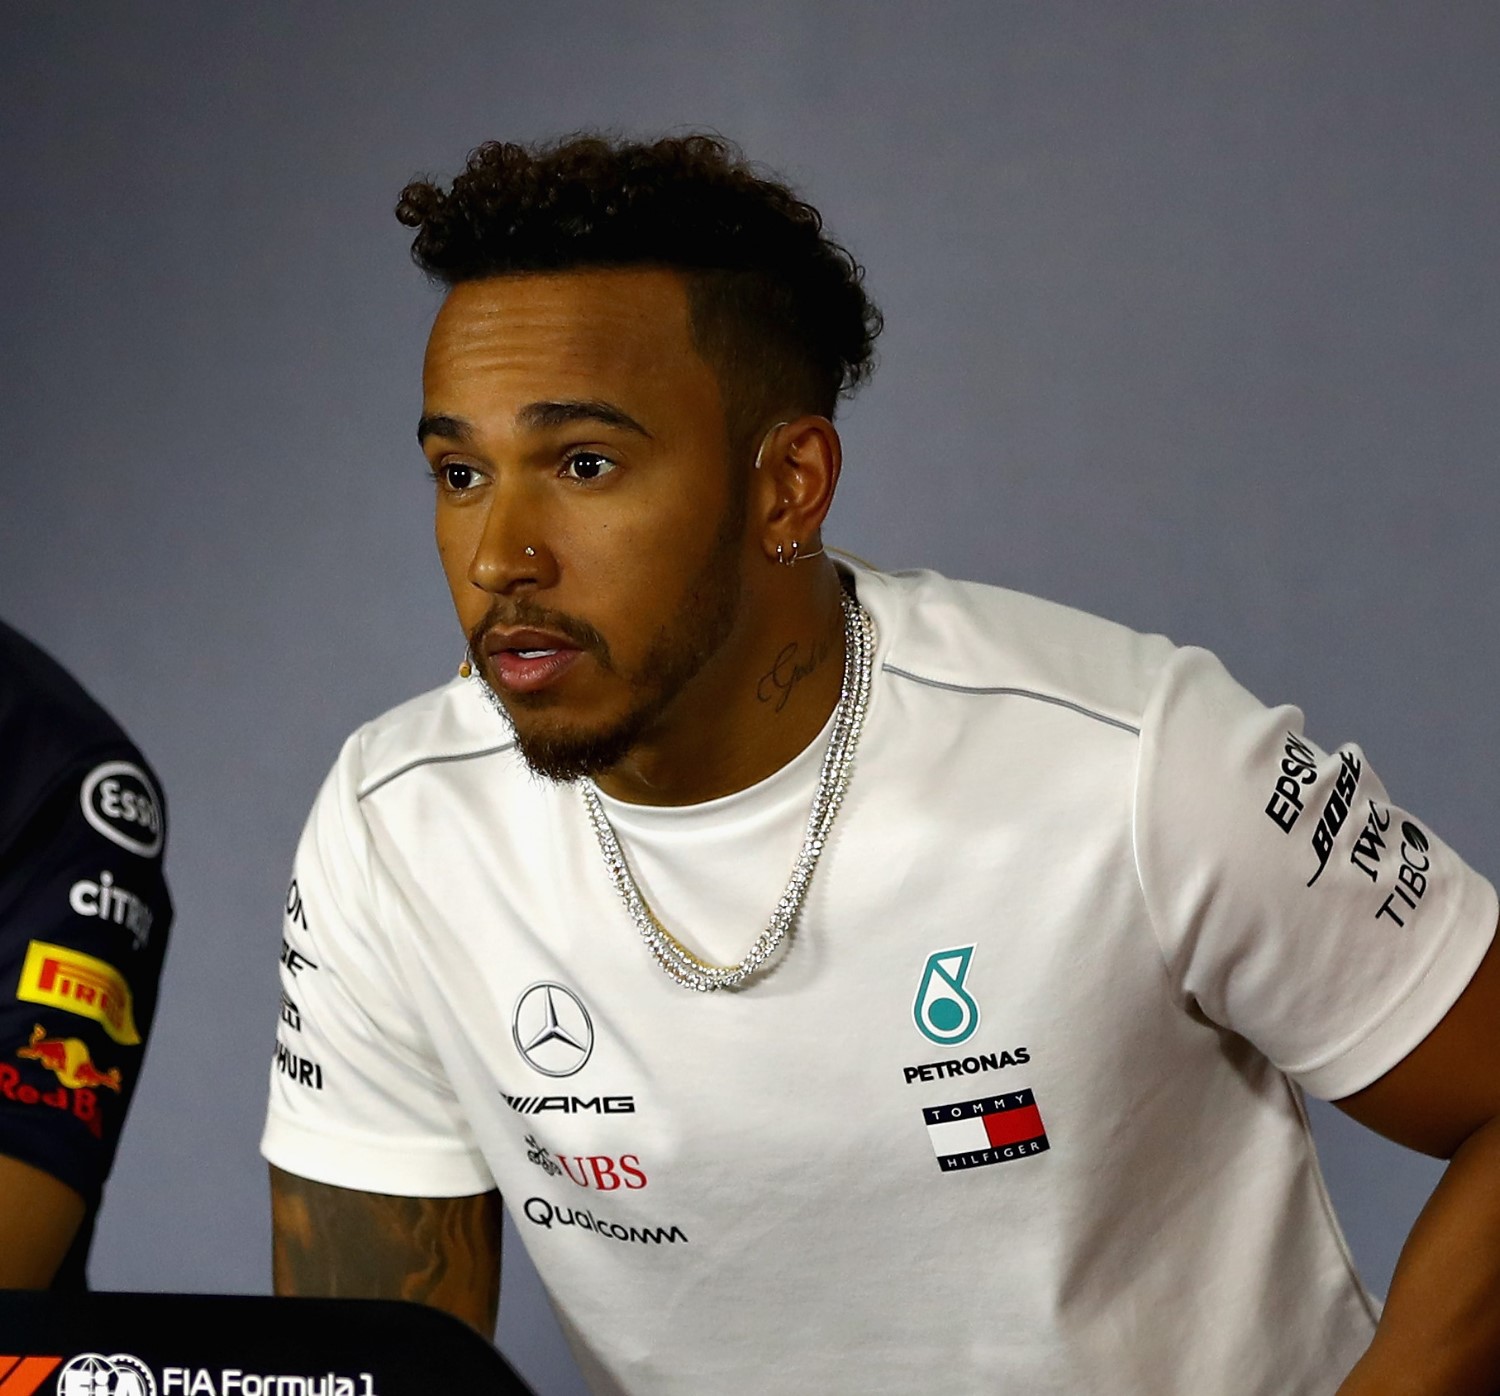 Lewis Hamilton says the 0.887s improvement was nothing to do with any special 'party' mode on his engine. "I can assure you we don’t have a party mode. I used the same mode from Q2 to the end of Q3. There was no extra mode, no extra button I engaged in.